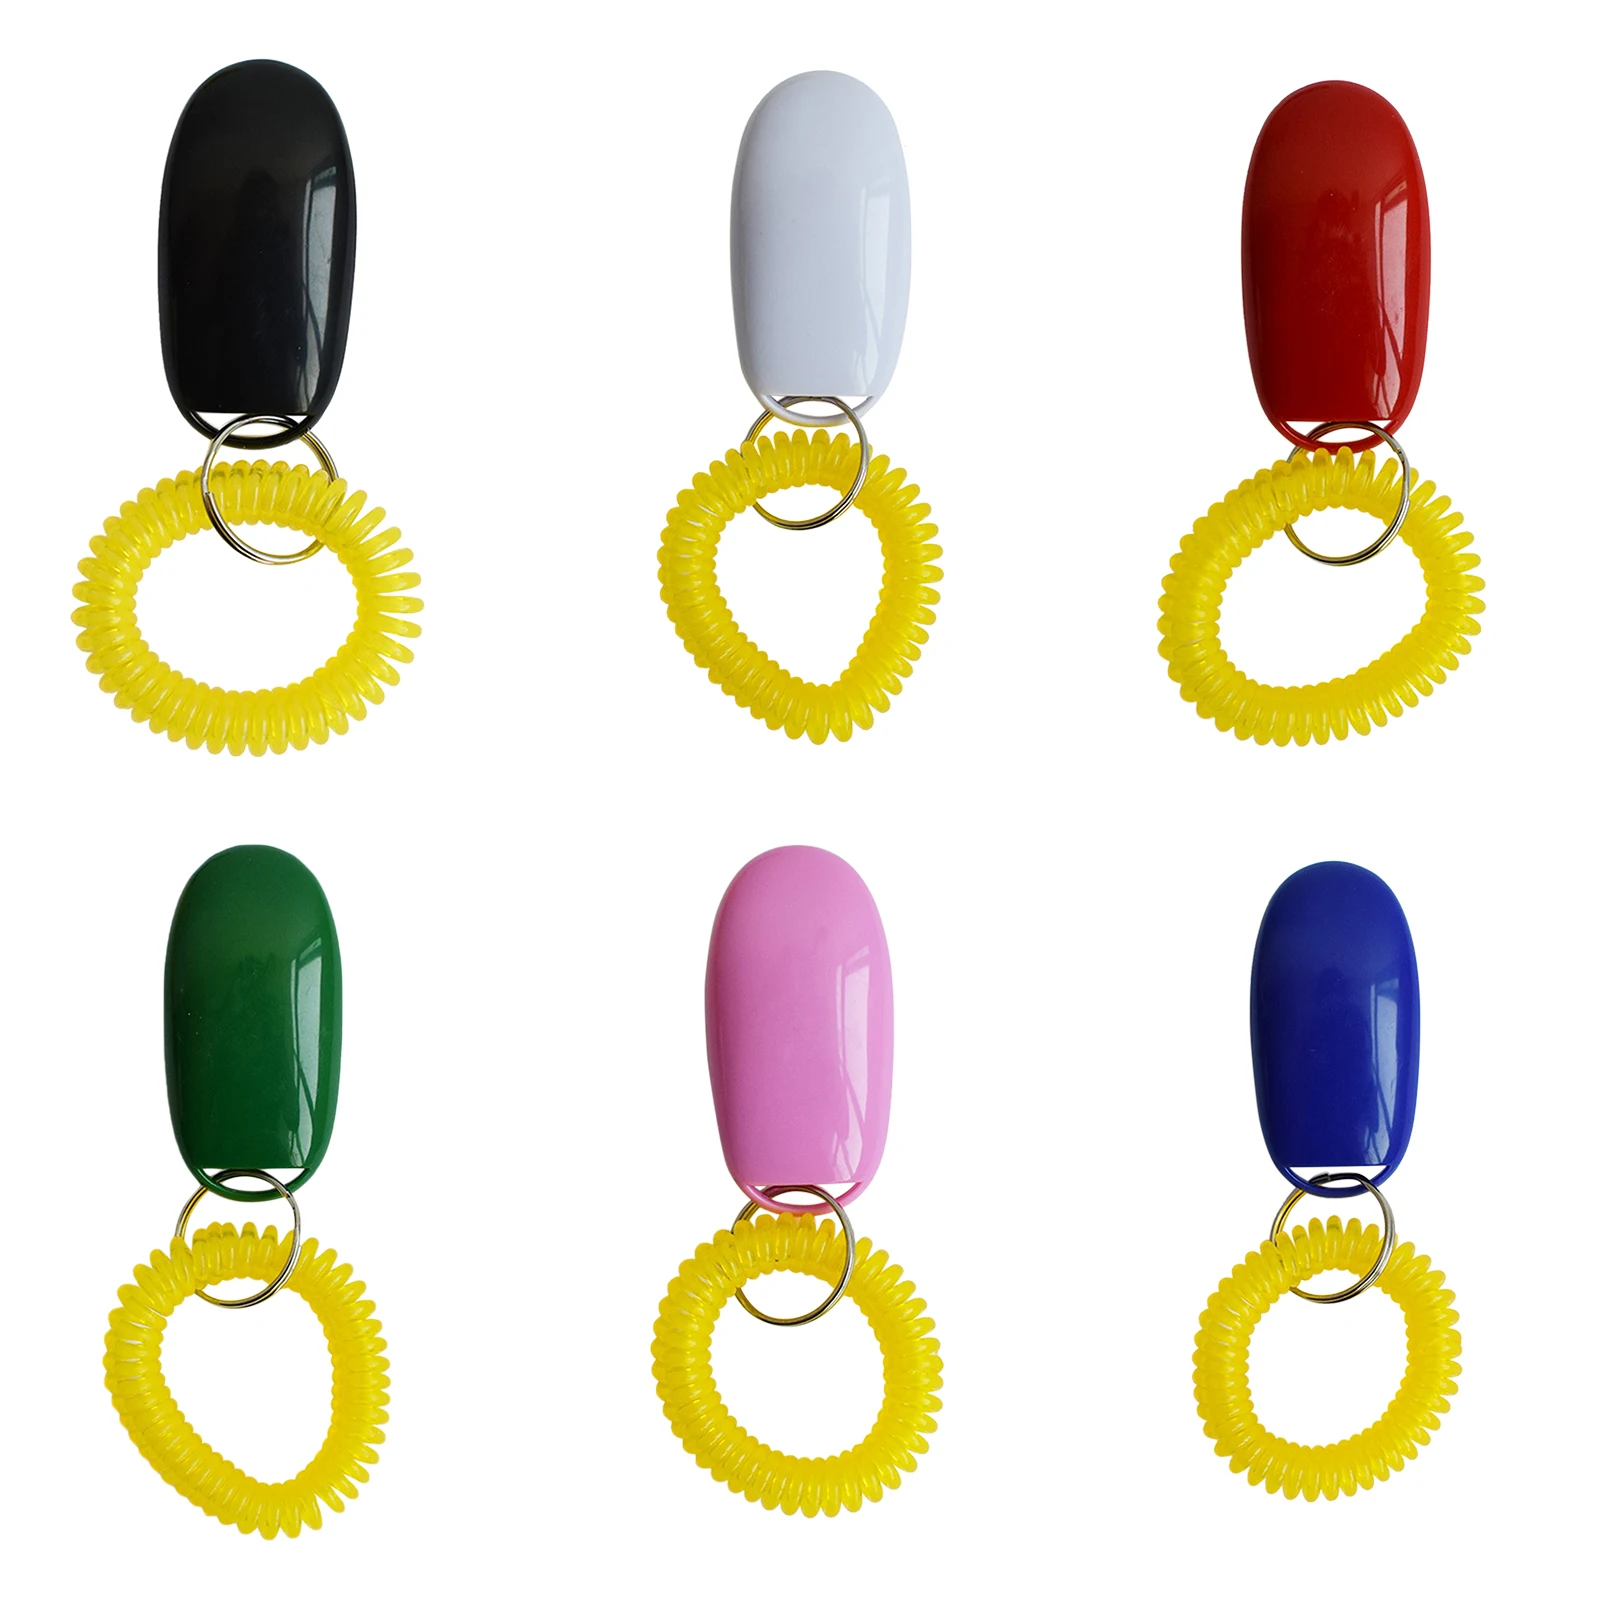 

Whistles Key Ring Dog Clicker Pet Training Clicke Pet Puppy Dog Cat Training And Wrist Strap Pet Dog Trainings Products Supplies